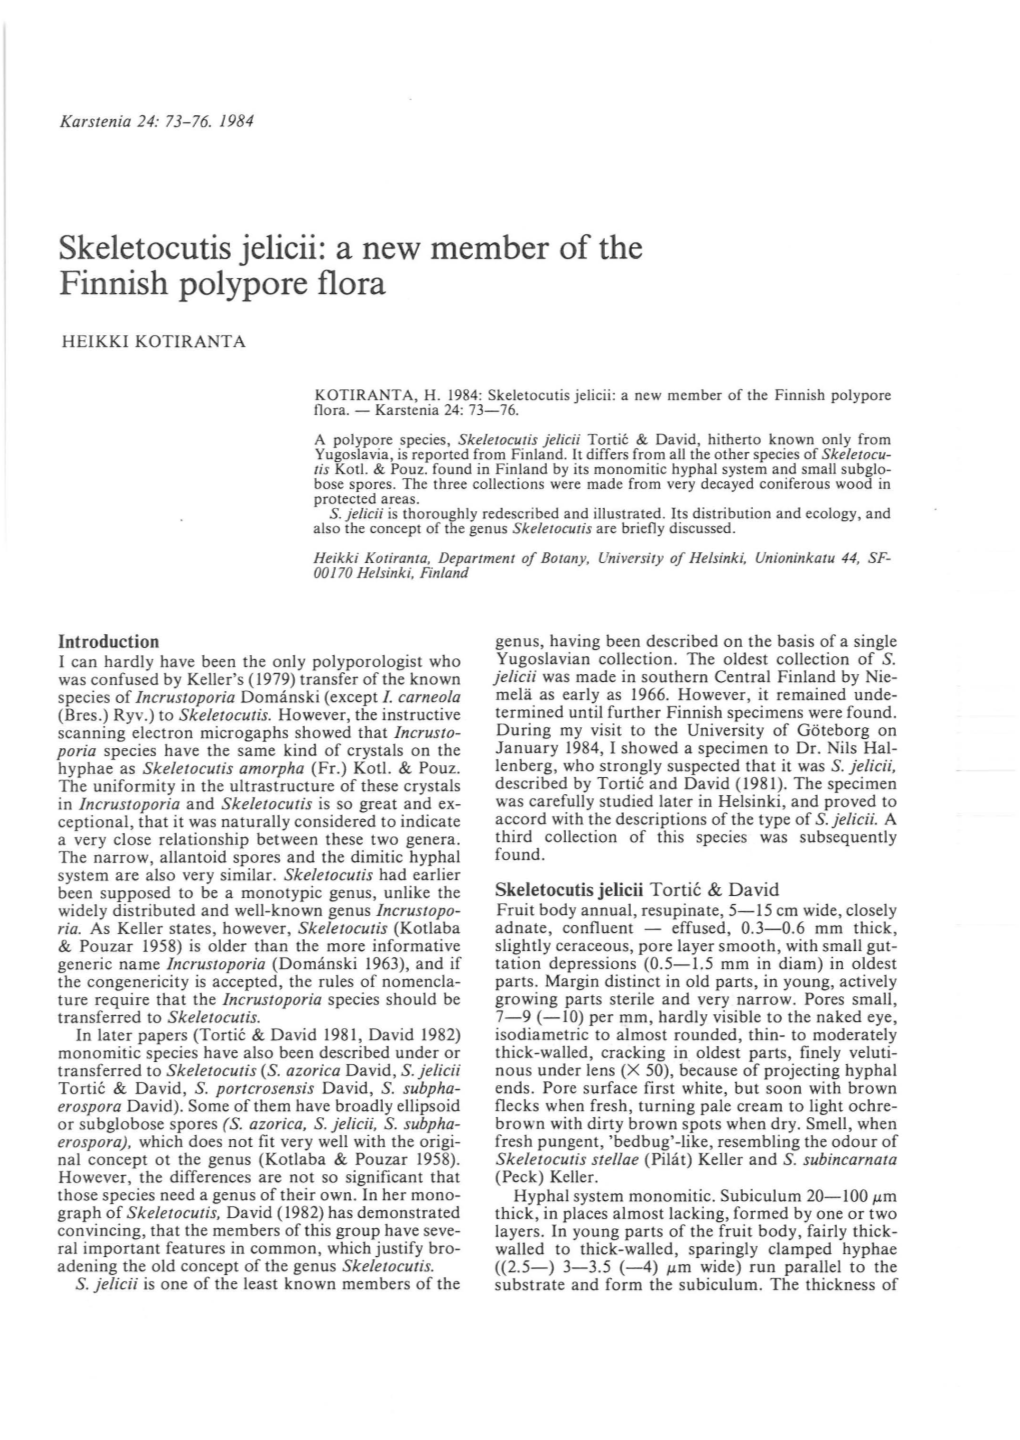 Skeletocutis Jelicii: a New Member of the Finnish Polypore Flora